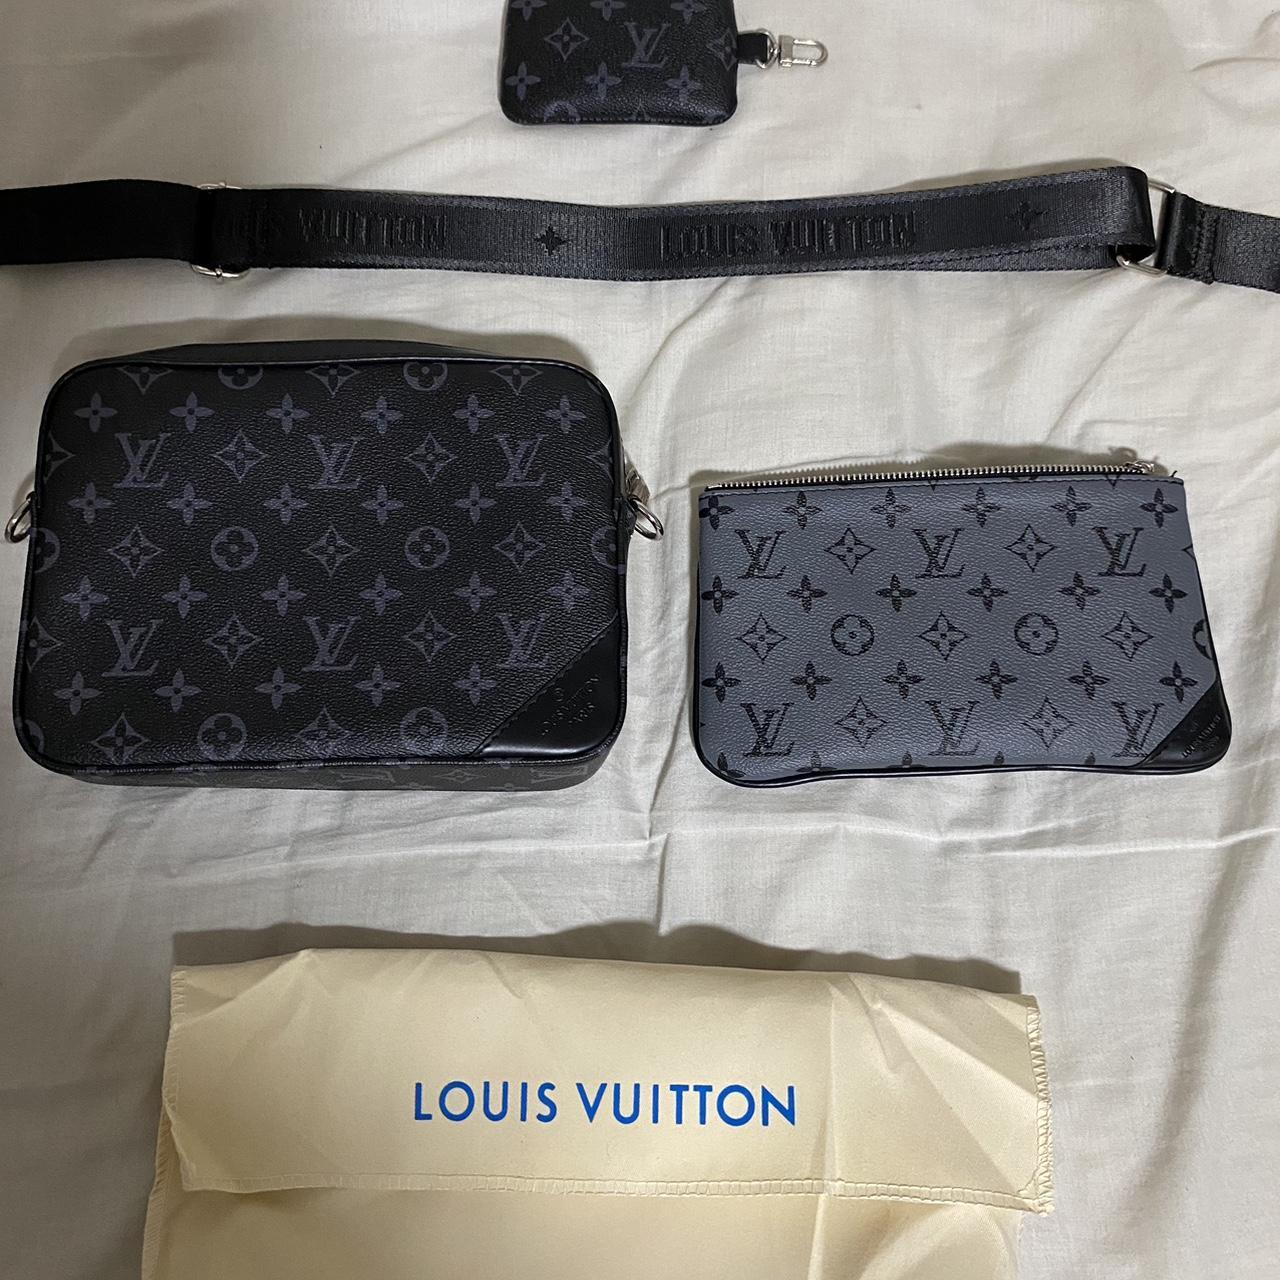 Lv Trio Bag- Shipped within 1 day🚚 Great... - Depop